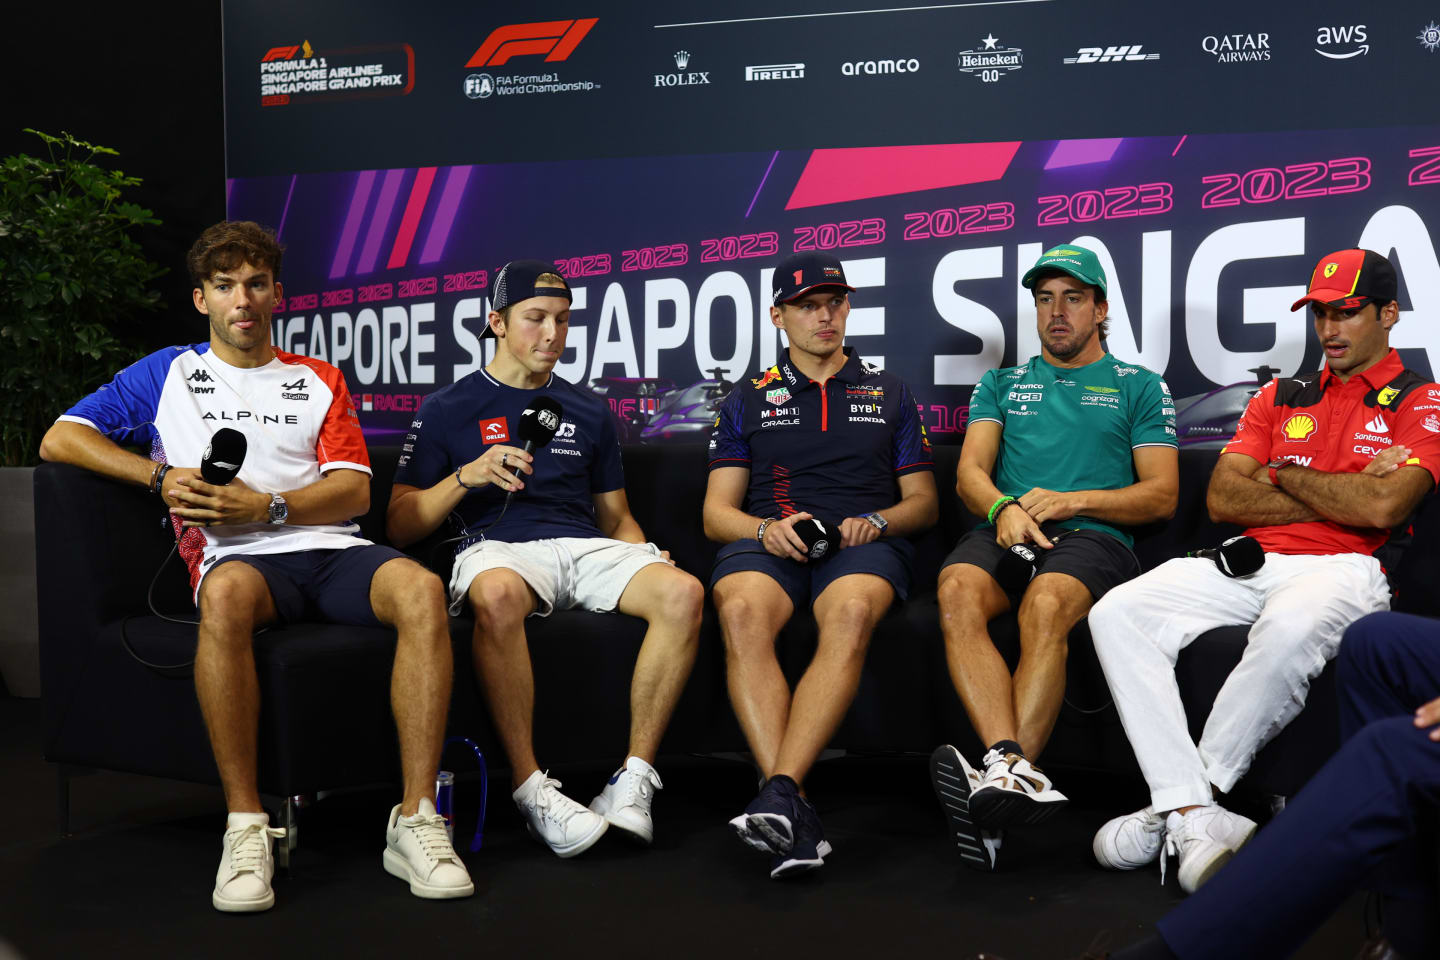 SINGAPORE, SINGAPORE - SEPTEMBER 14: Pierre Gasly of France and Alpine F1, Liam Lawson of New Zealand and Scuderia AlphaTauri, Max Verstappen of the Netherlands and Oracle Red Bull Racing, Fernando Alonso of Spain and Aston Martin F1 Team and Carlos Sainz of Spain and Ferrari  attend the Drivers Press Conference during previews ahead of the F1 Grand Prix of Singapore at Marina Bay Street Circuit on September 14, 2023 in Singapore, Singapore. (Photo by Clive Rose/Getty Images)